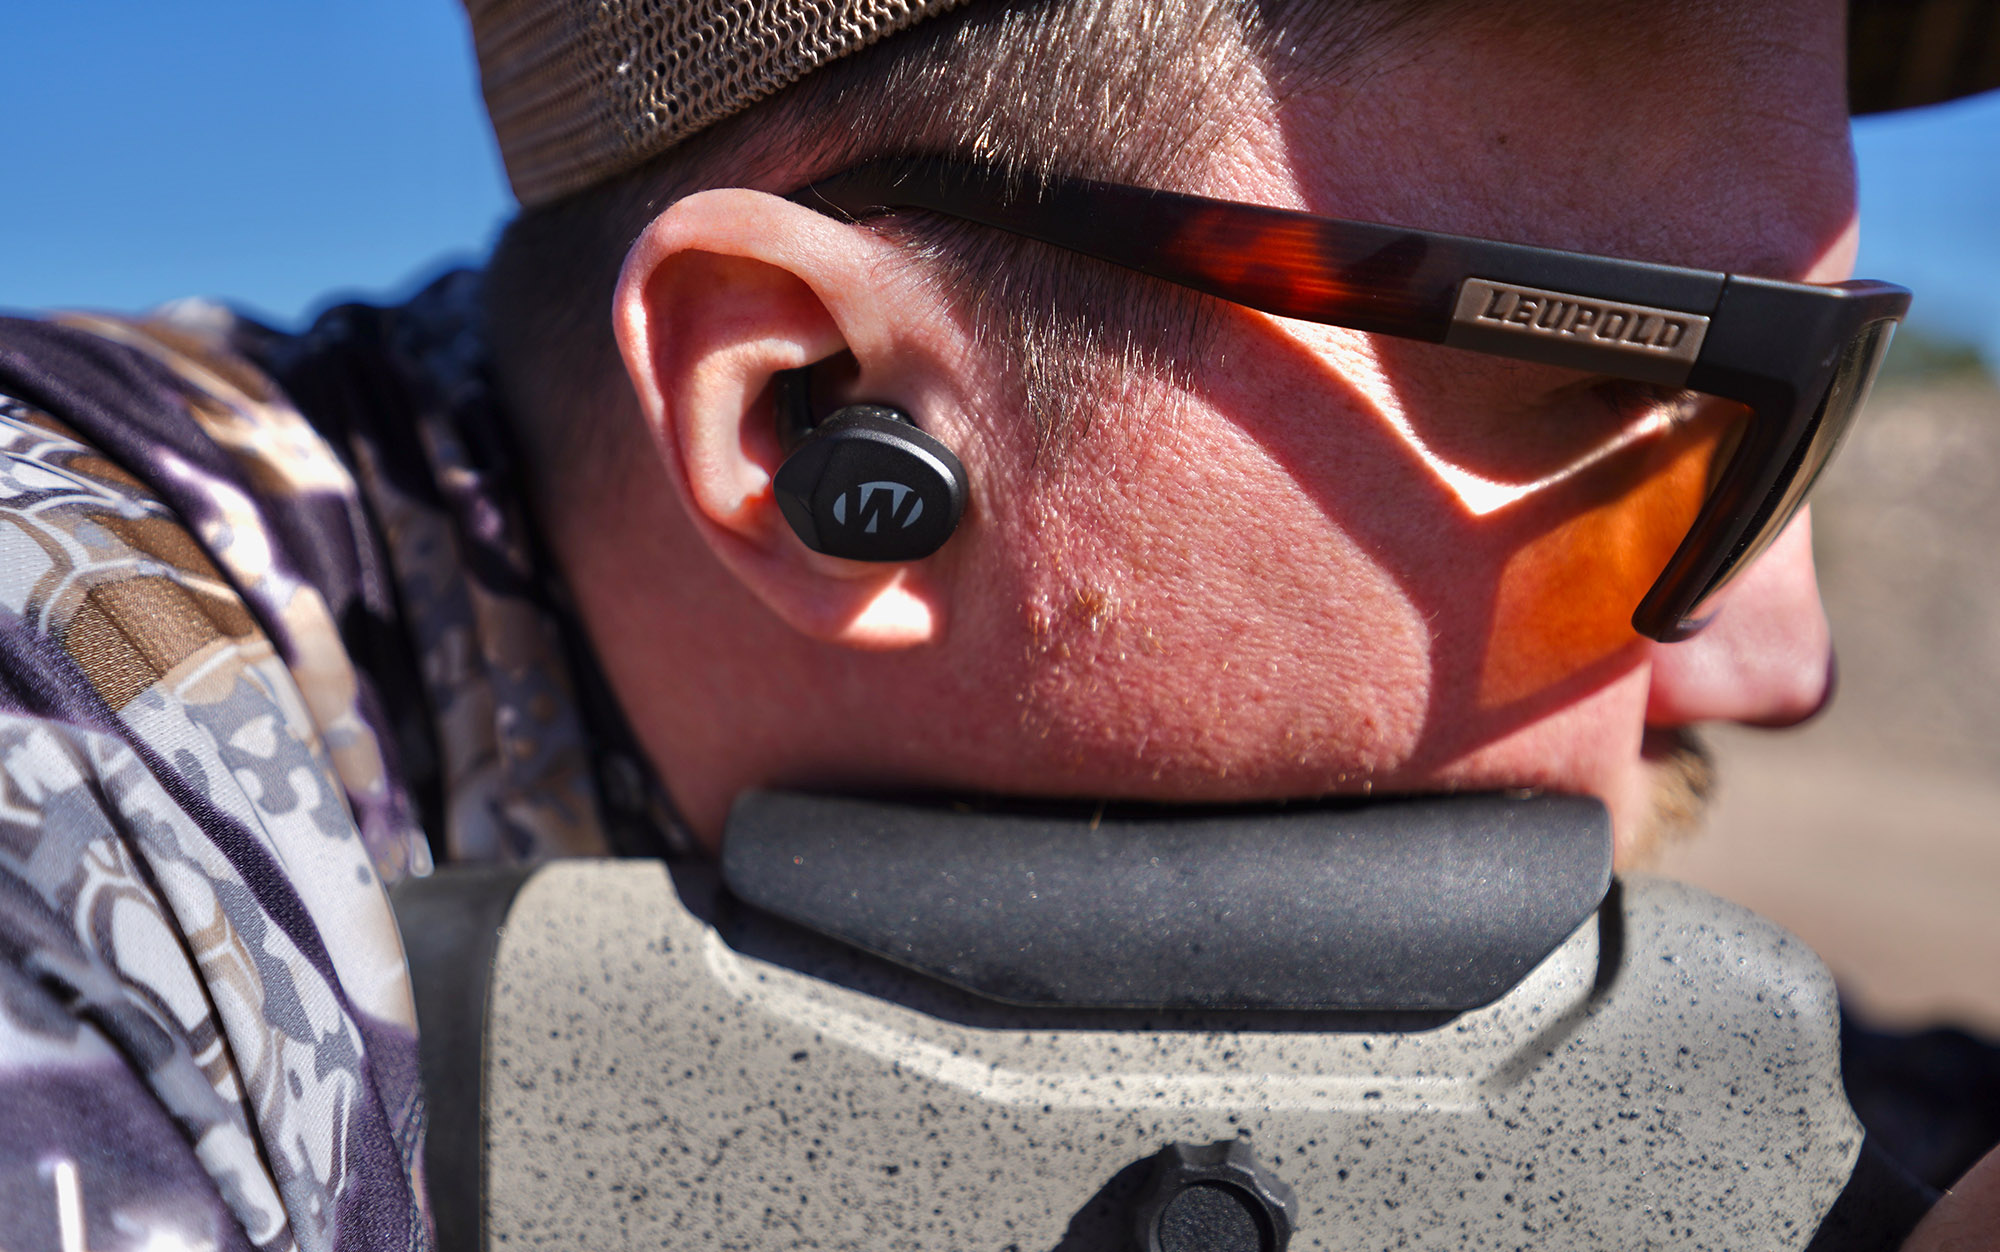 Tyler Freel was able to listen to safely music on the range with the Walker’s Silencer BT 2.0.